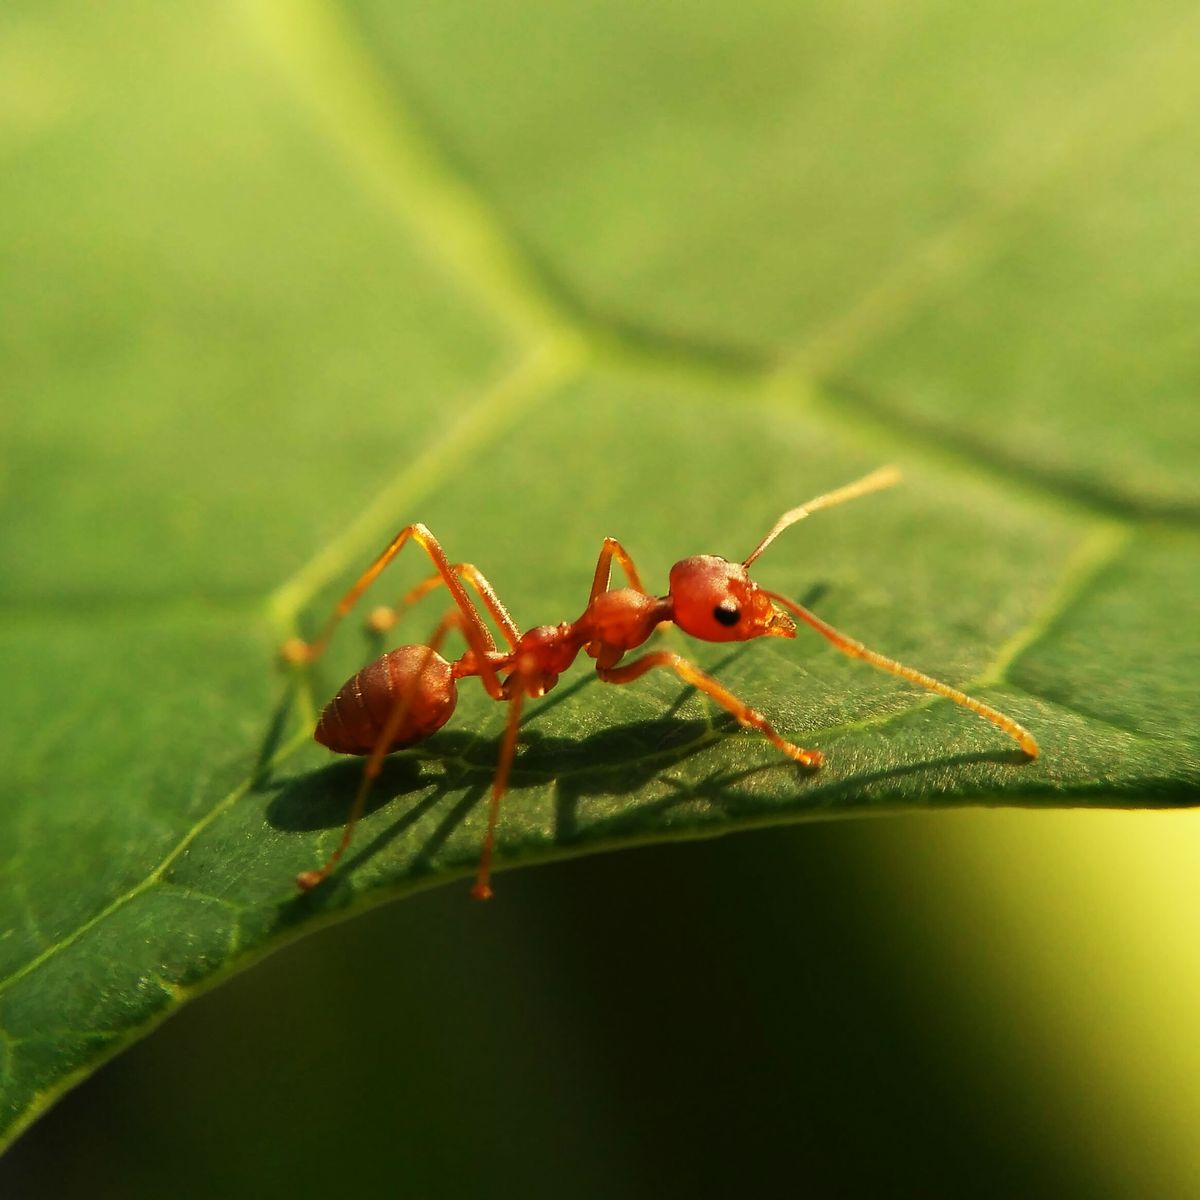 ant bites, extreme close up of red ant on leaf